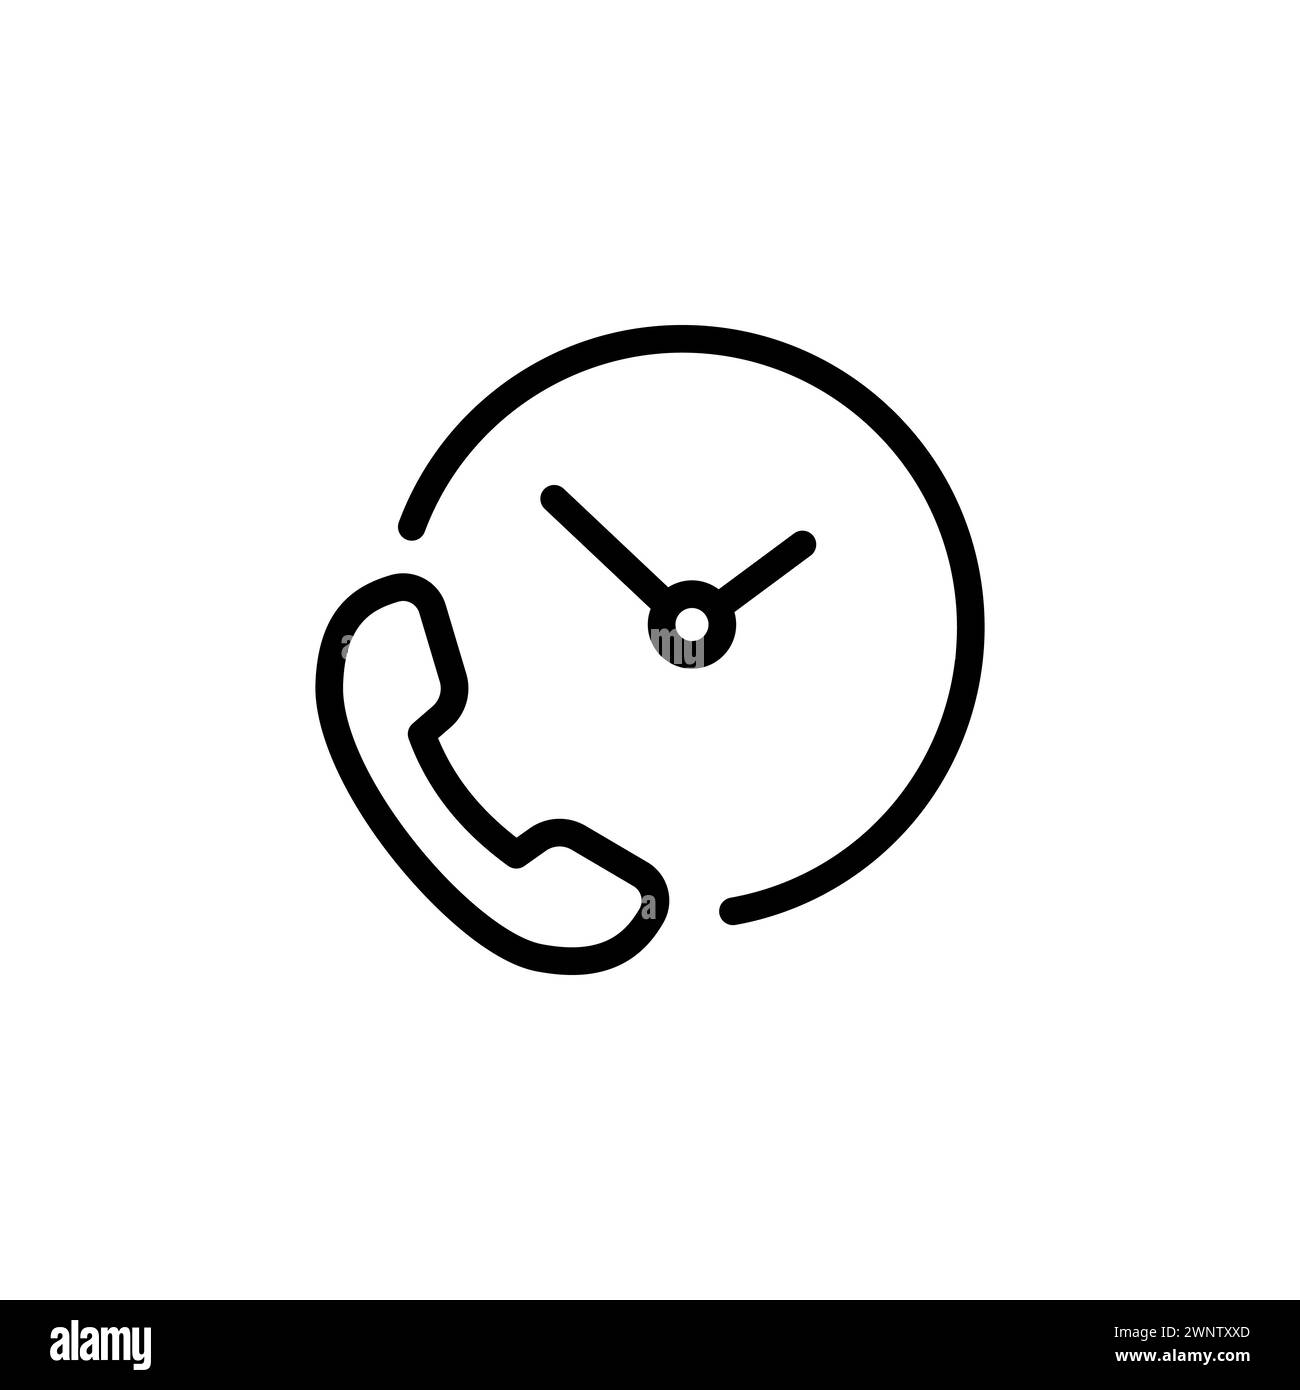 Clock and call button, phone call duration, call waiting vector icon in line style design for website, app, UI, isolated on white background. Stock Vector